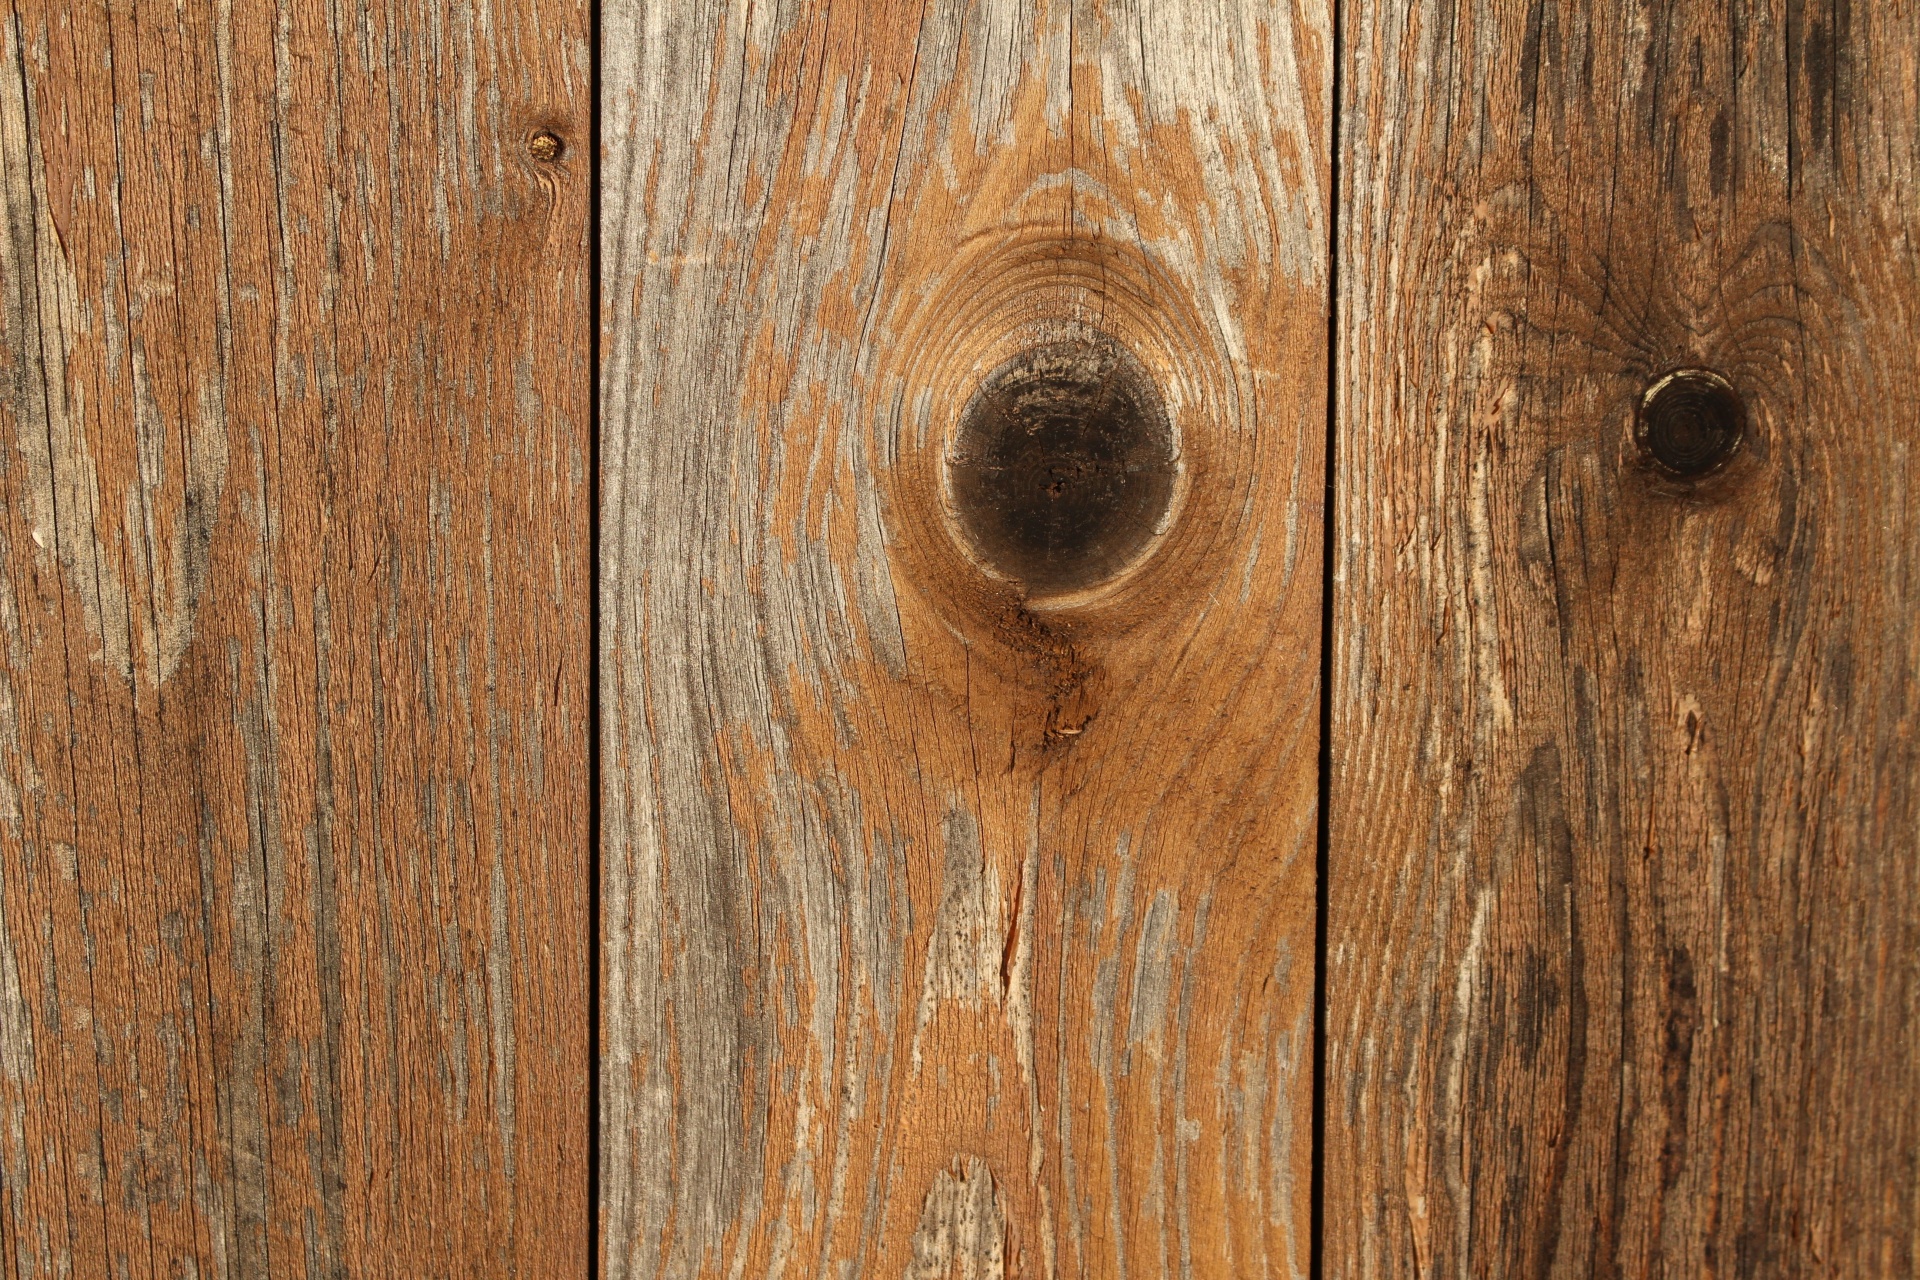 Background, Old Wood Texture